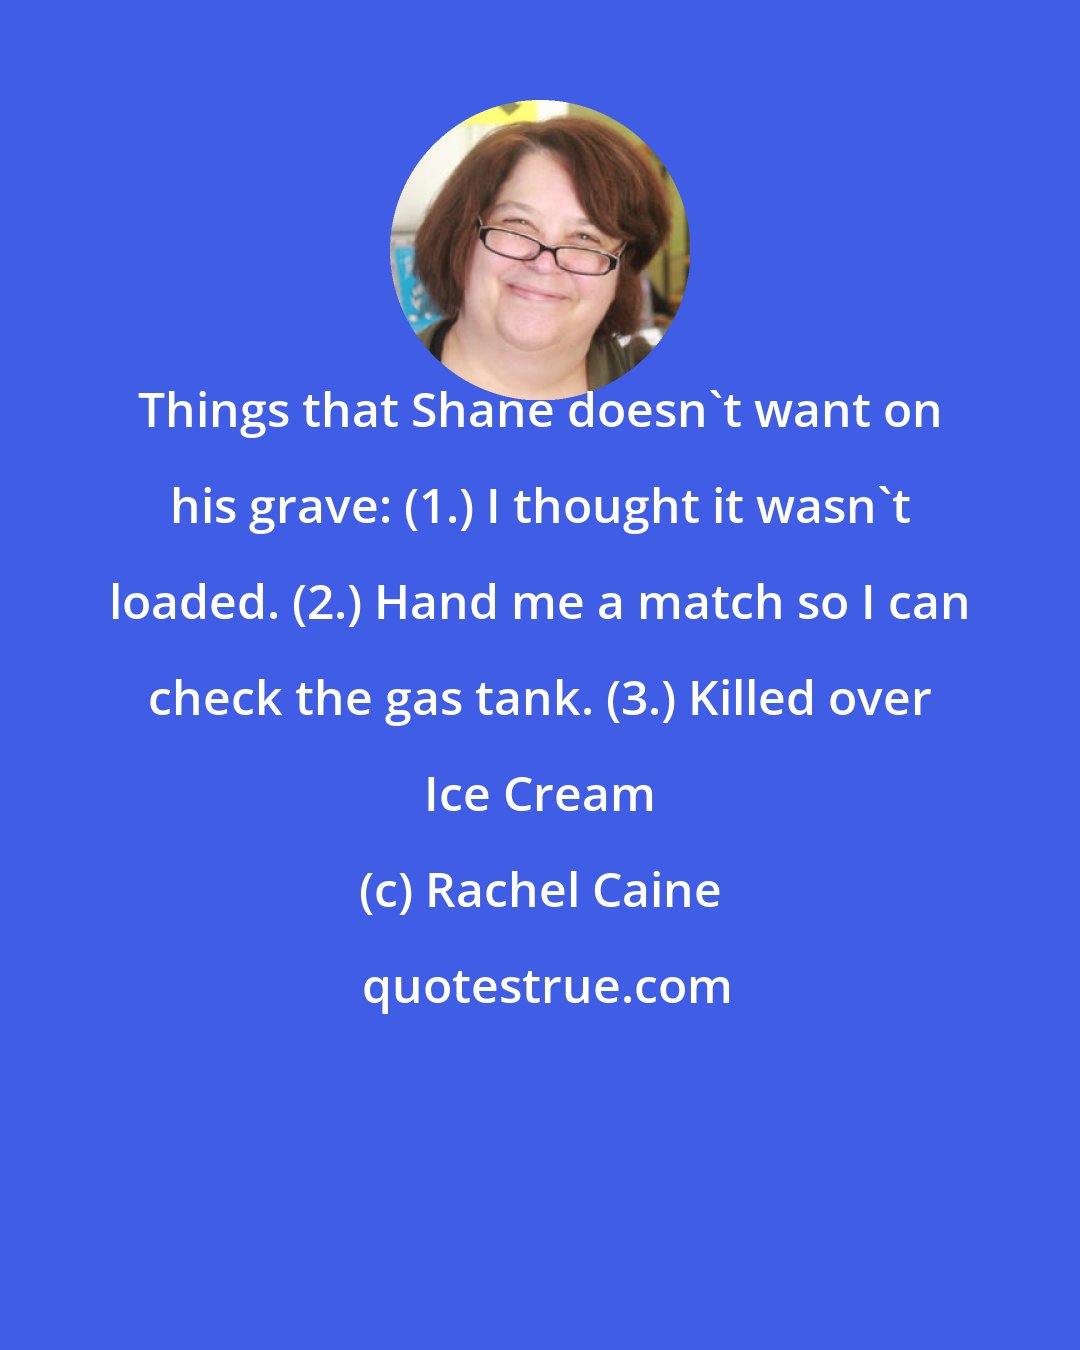 Rachel Caine: Things that Shane doesn't want on his grave: (1.) I thought it wasn't loaded. (2.) Hand me a match so I can check the gas tank. (3.) Killed over Ice Cream